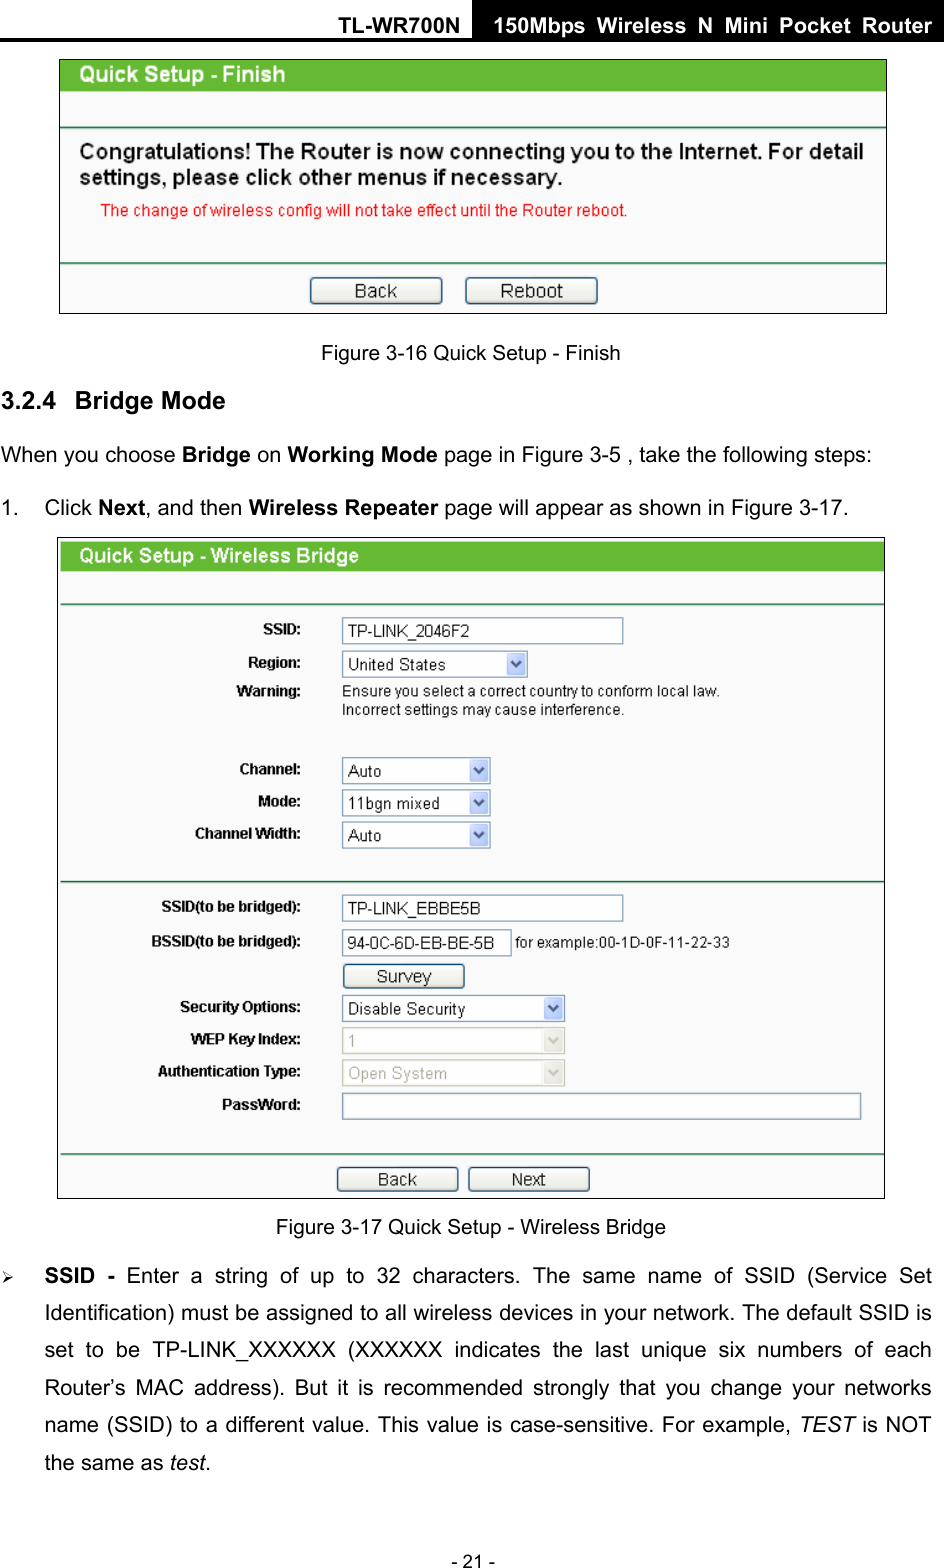 TL-WR700N 150Mbps Wireless N Mini Pocket Router - 21 -  Figure 3-16 Quick Setup - Finish 3.2.4  Bridge Mode When you choose Bridge on Working Mode page in Figure 3-5 , take the following steps: 1. Click Next, and then Wireless Repeater page will appear as shown in Figure 3-17.  Figure 3-17 Quick Setup - Wireless Bridge ¾ SSID - Enter a string of up to 32 characters. The same name of SSID (Service Set Identification) must be assigned to all wireless devices in your network. The default SSID is set to be TP-LINK_XXXXXX (XXXXXX indicates the last unique six numbers of each Router’s MAC address). But it is recommended strongly that you change your networks name (SSID) to a different value. This value is case-sensitive. For example, TEST is NOT the same as test. 